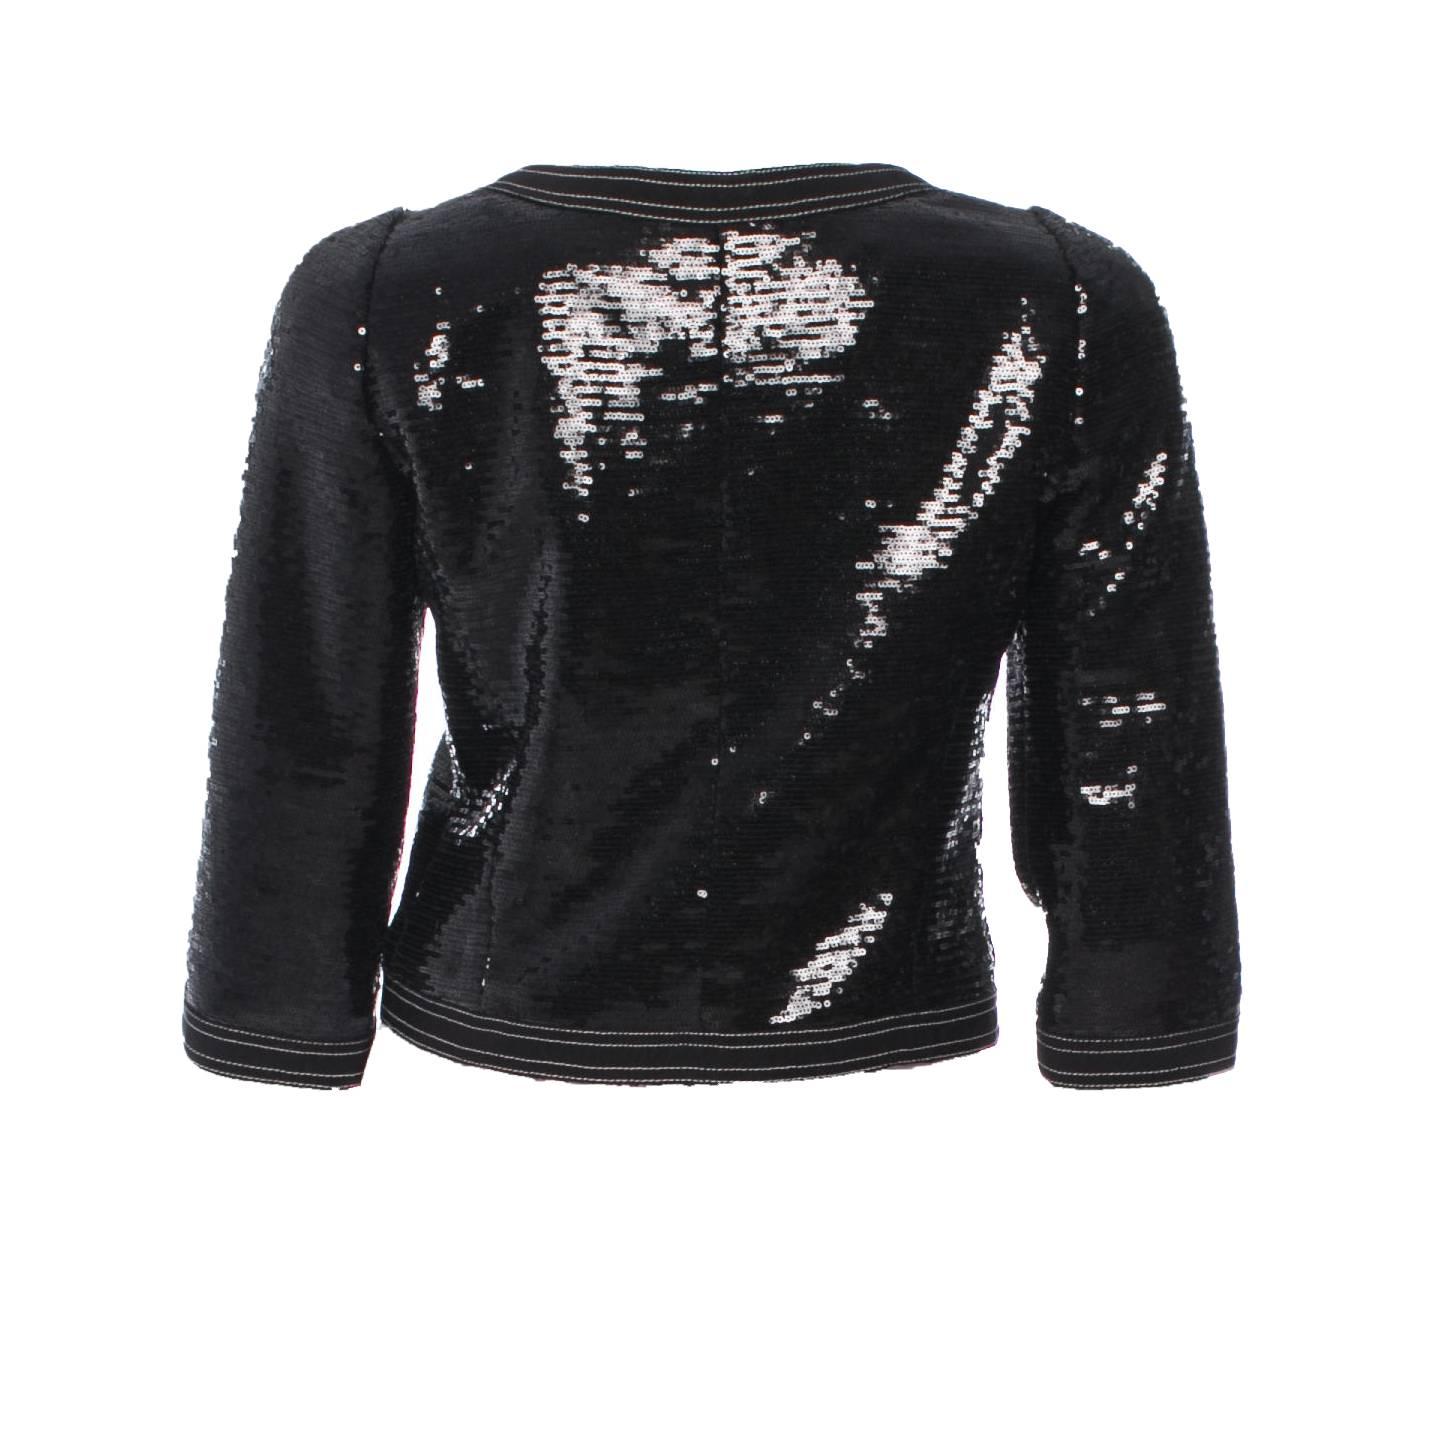 Stunning Black Chanel Sequin Jacket
One of Chanel's absolute signature pieces
The famous Little Black Jacket
Cropped Sleeves
Fully lined with silk
Sold out immediately
Recent collection
Brandnew